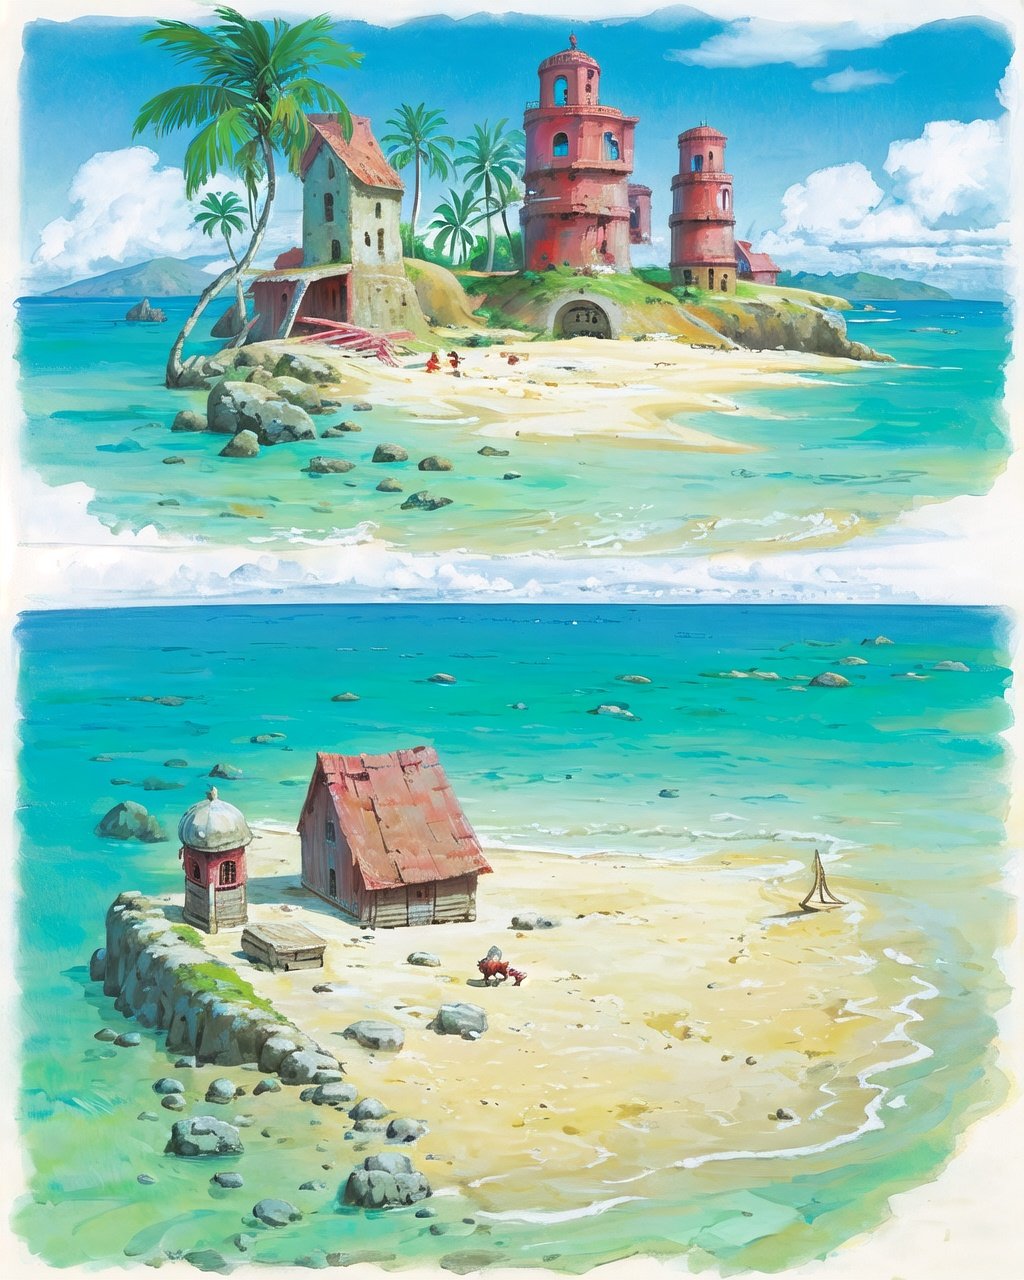 1other,Oceans, islands, ancient buildings, pirates,concept